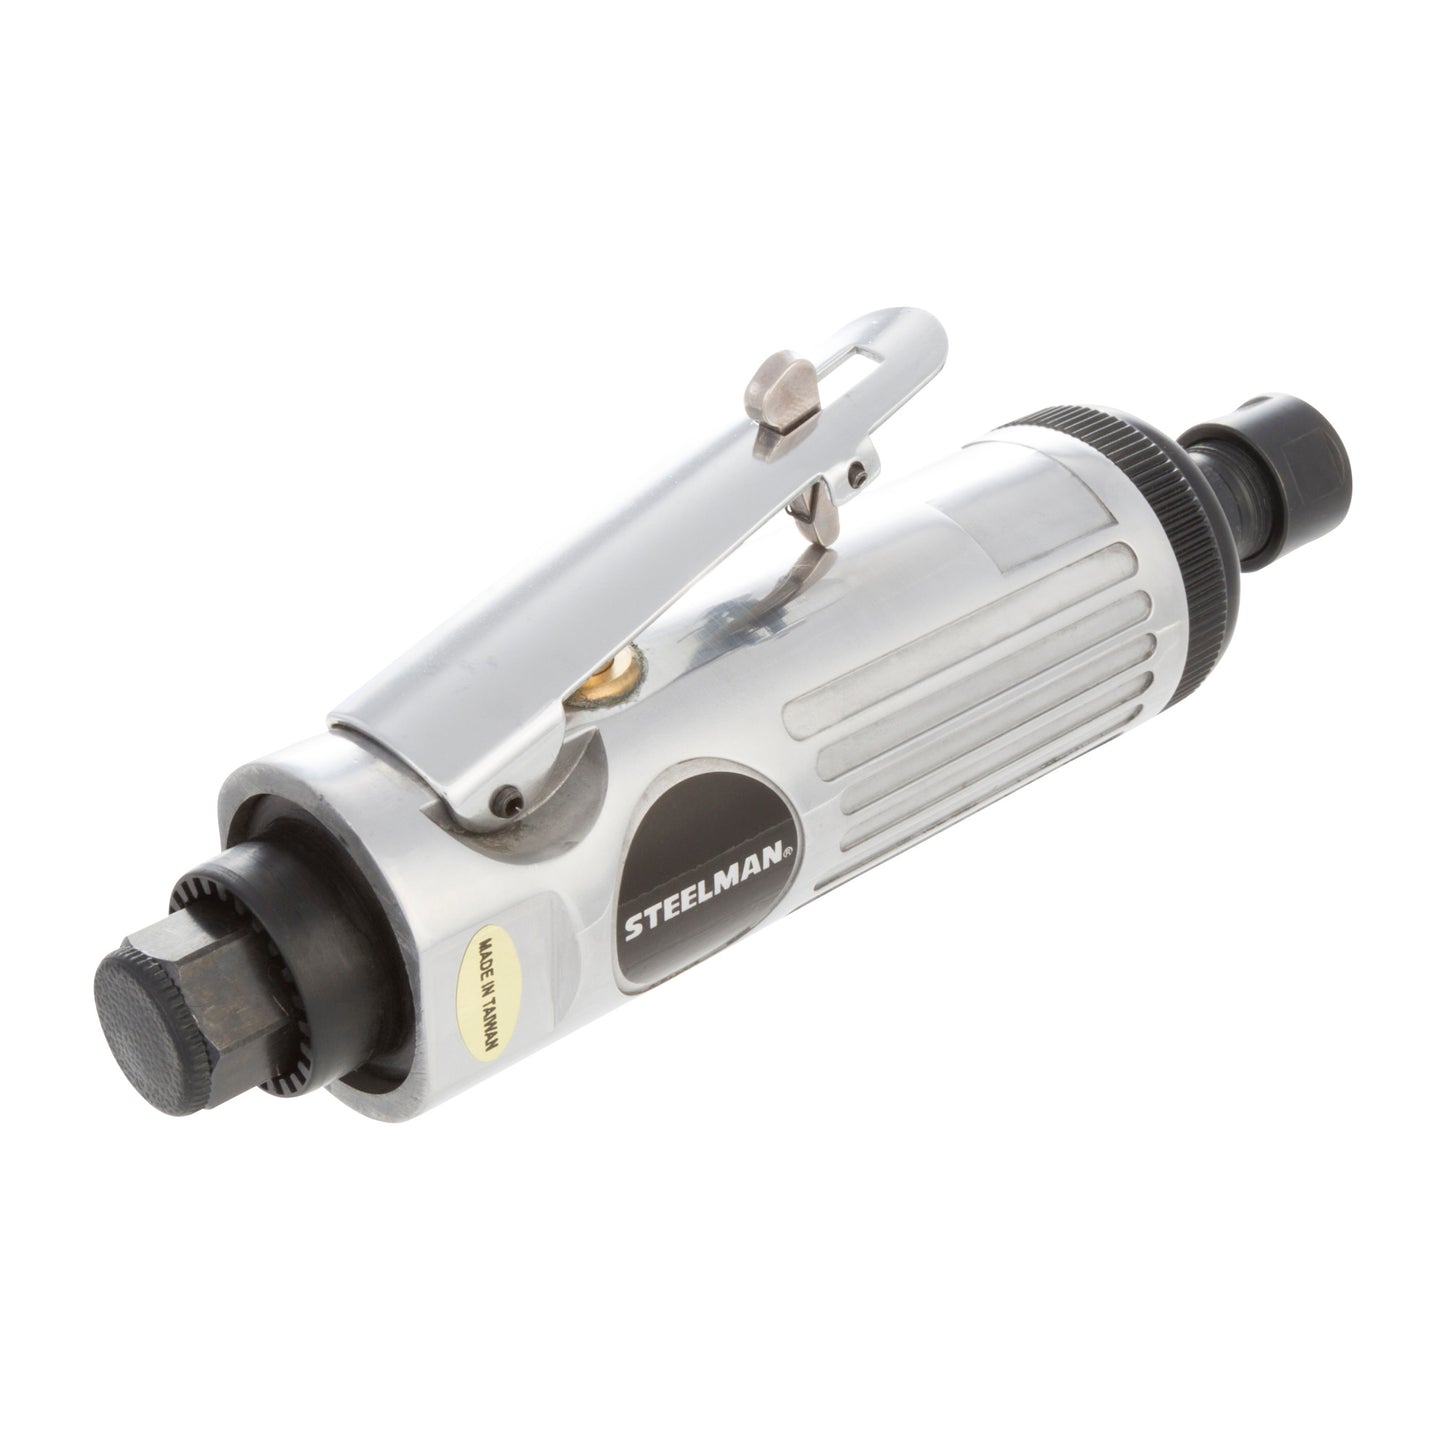 1/4-inch Pneumatic Die Grinder with Rear Exhaust